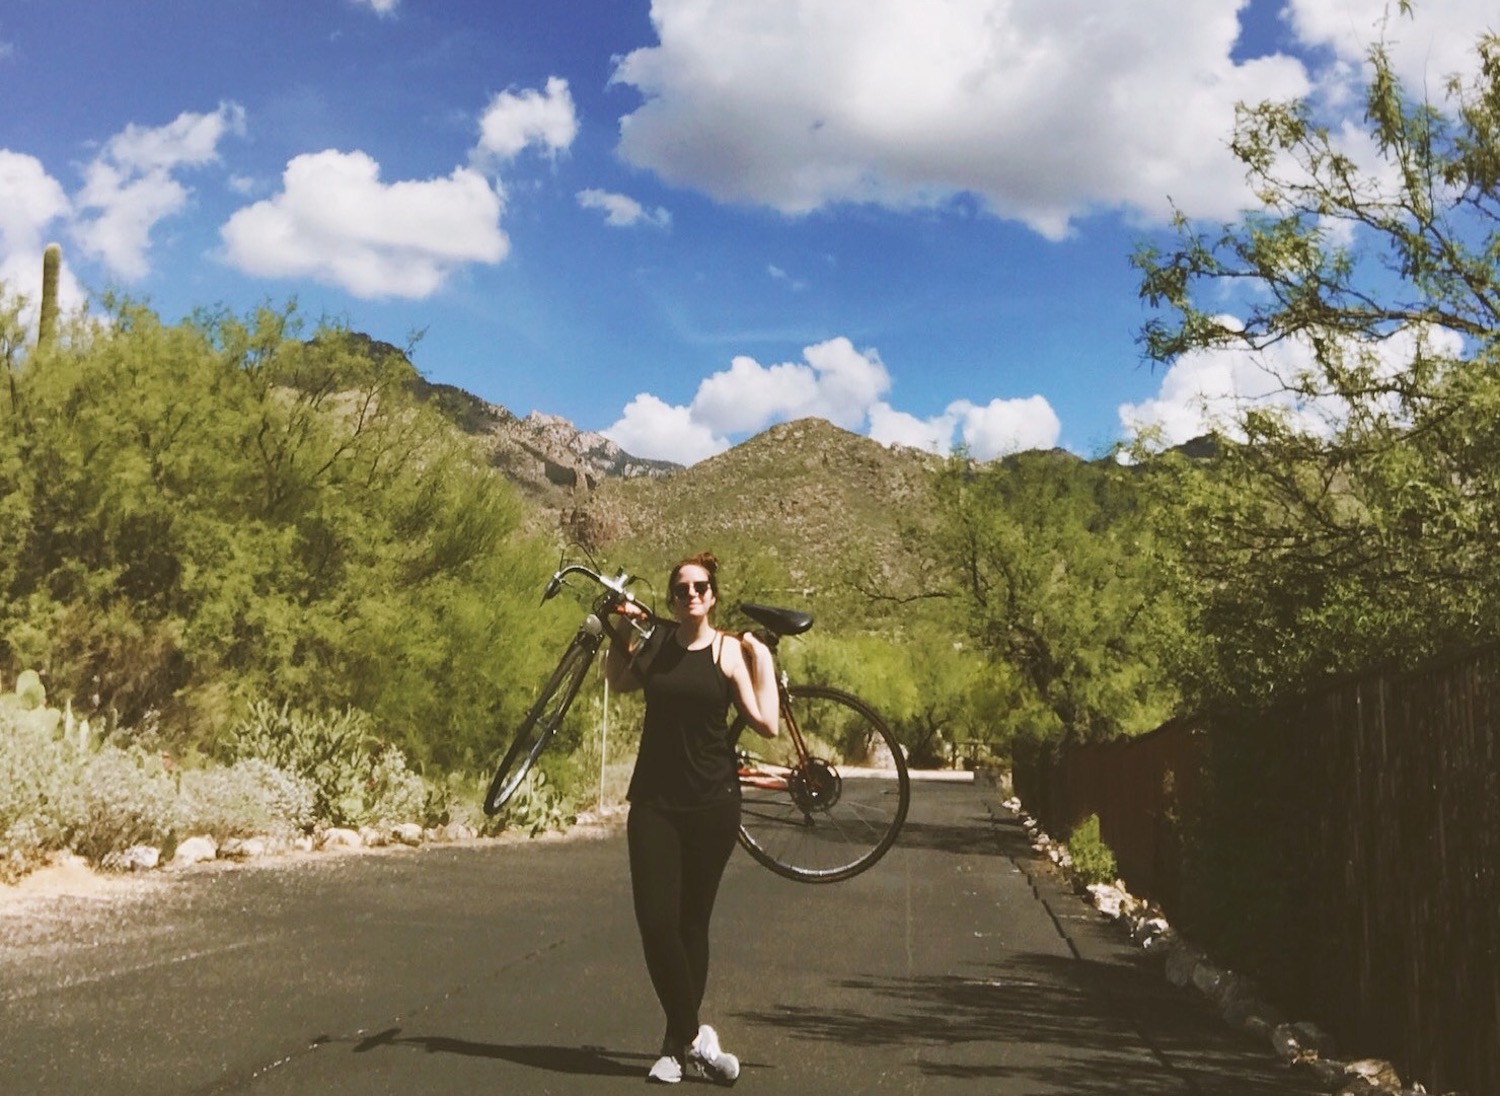 Marina cycling in the Tucson desert